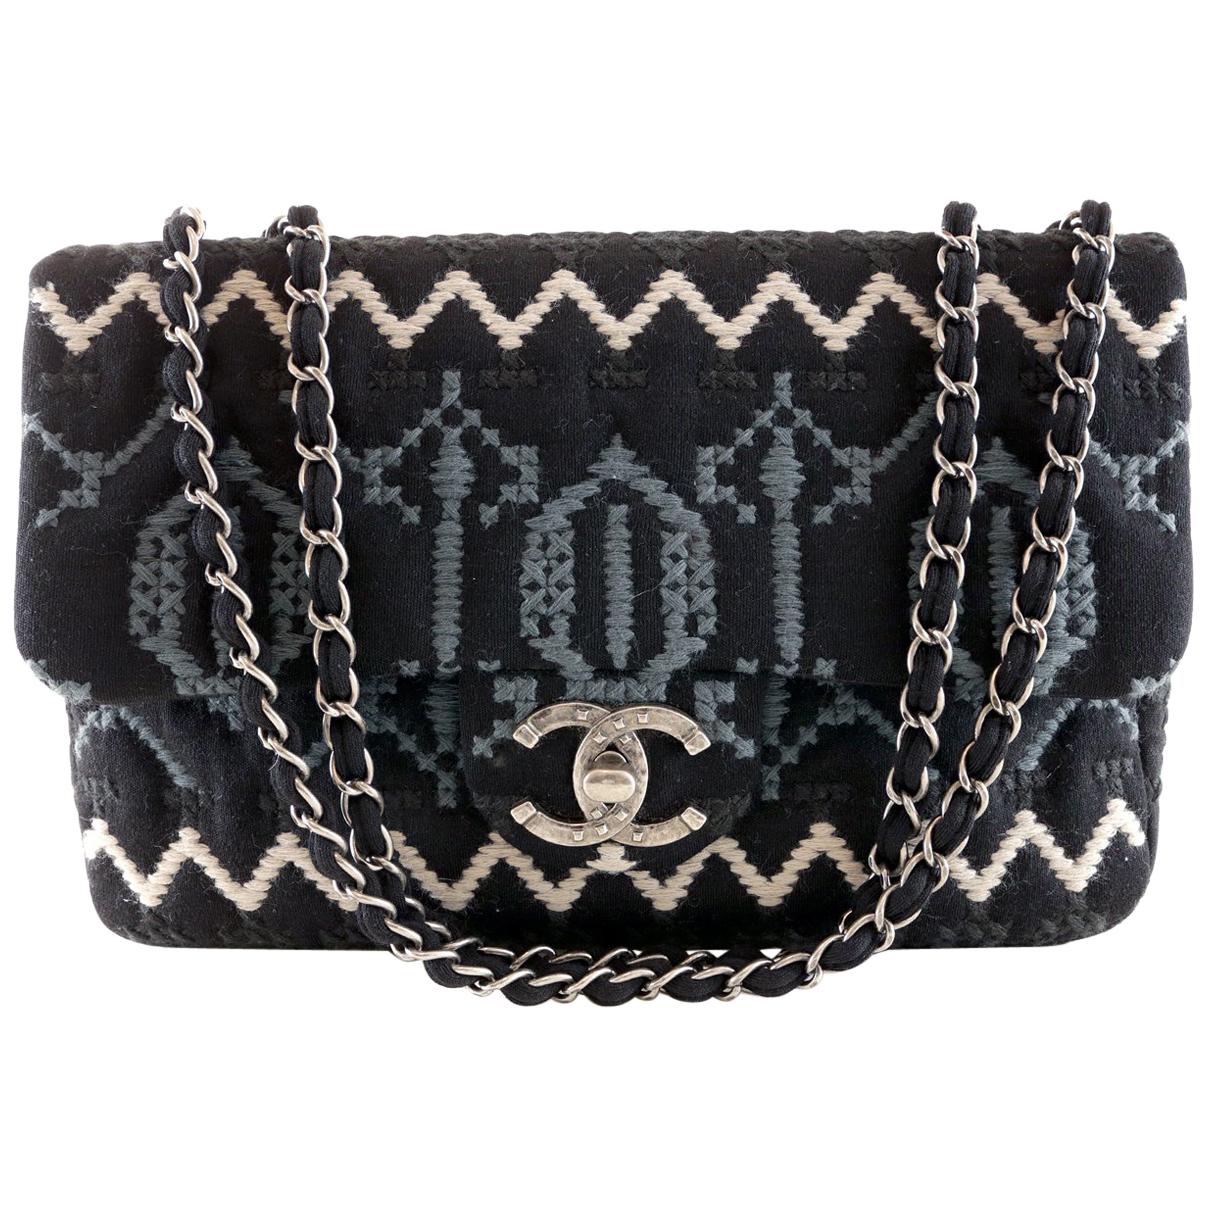 Chanel Black Jersey Embroidered Classic Flap Bag